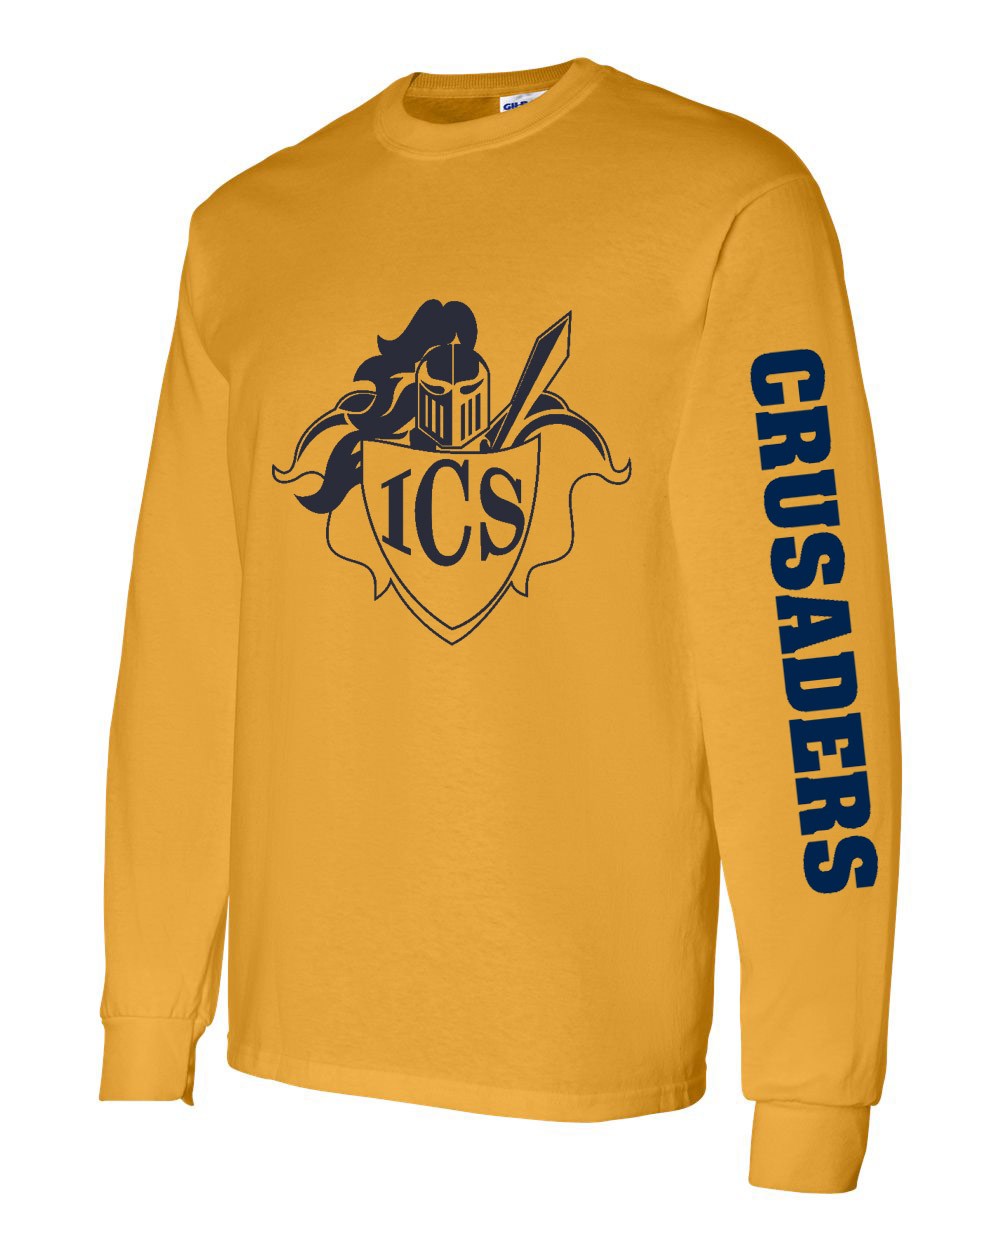 ICS Spirit L/S T-Shirt w/ Navy Logo - Please Allow 2-3 Weeks for Delivery